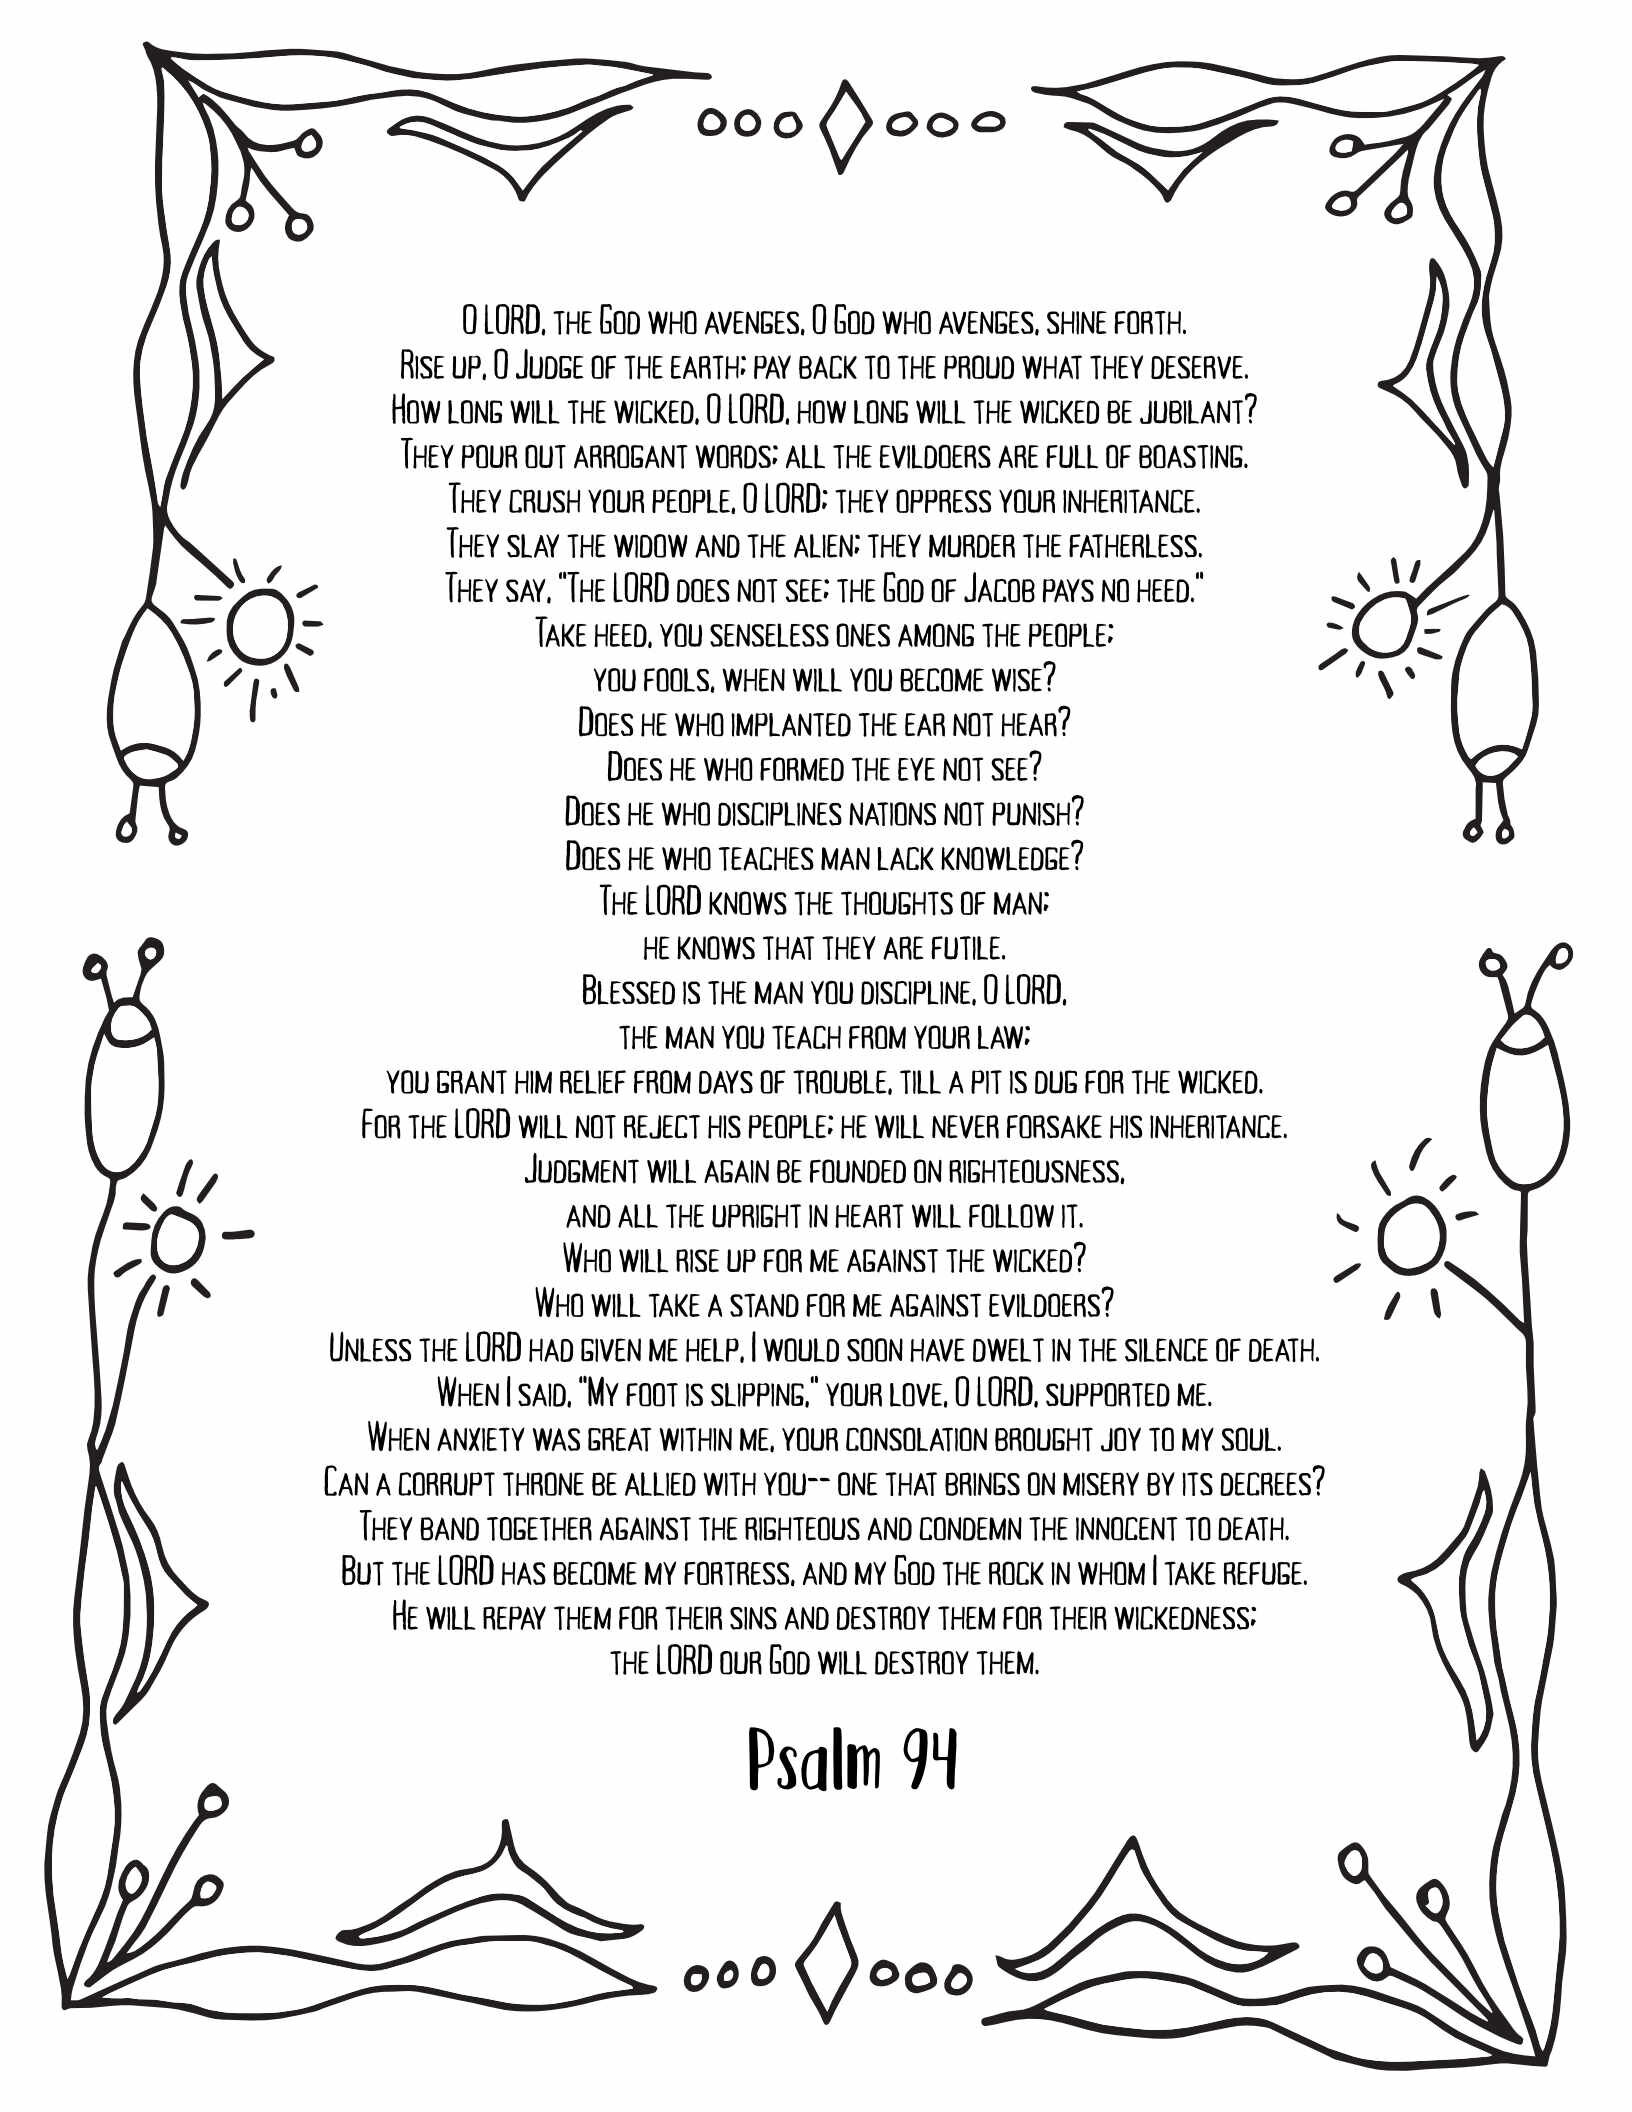 10 Free Printable Psalm Coloring Pages - Download and Color Adult Scripture - Psalm 94CLICK HERE TO DOWNLOAD THIS PAGE FREE